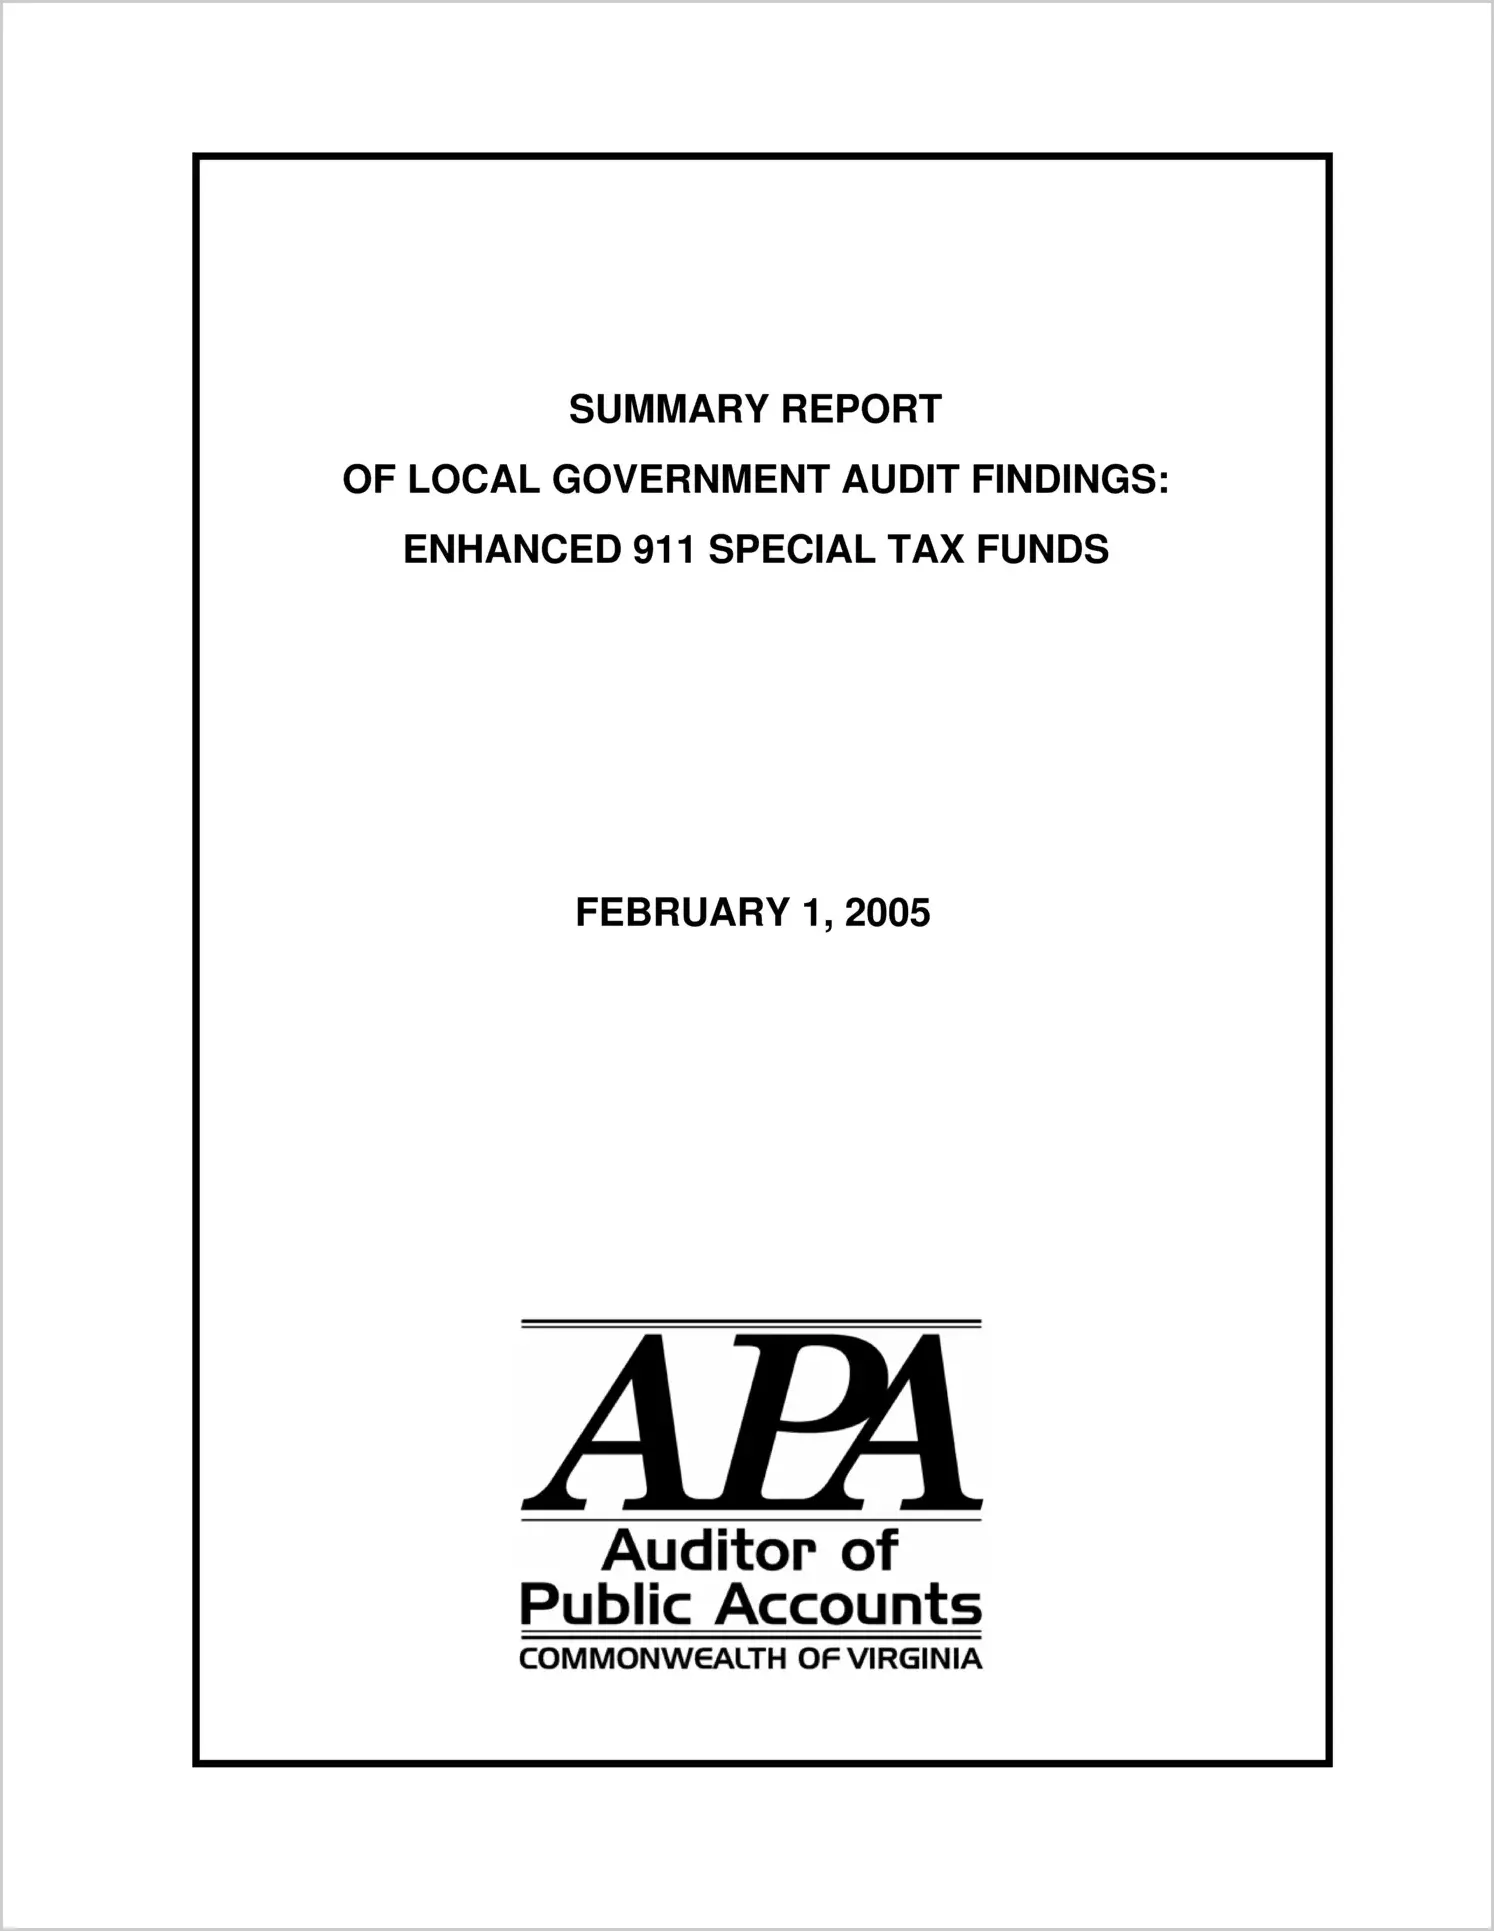 Special Report Summary Report of Local Government Audit Findings: Enhanced 911 Special Tax Funds(Report Date: 2/1/2005)